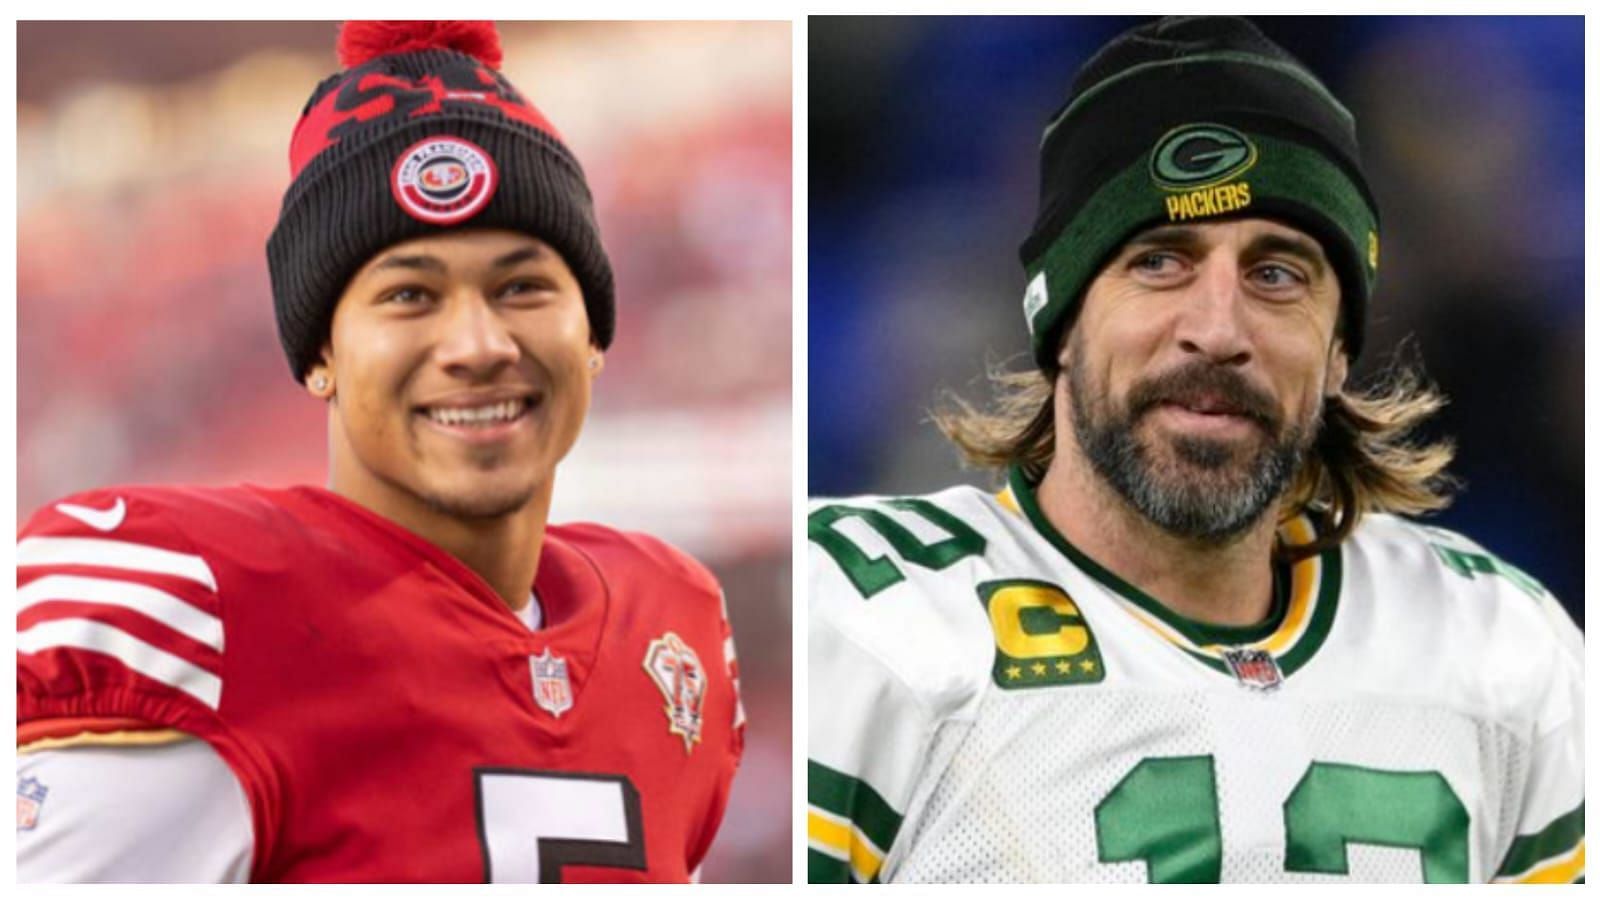 Trey Lance (left) had a limited role in his rookie NFL season much like Aaron Rodgers